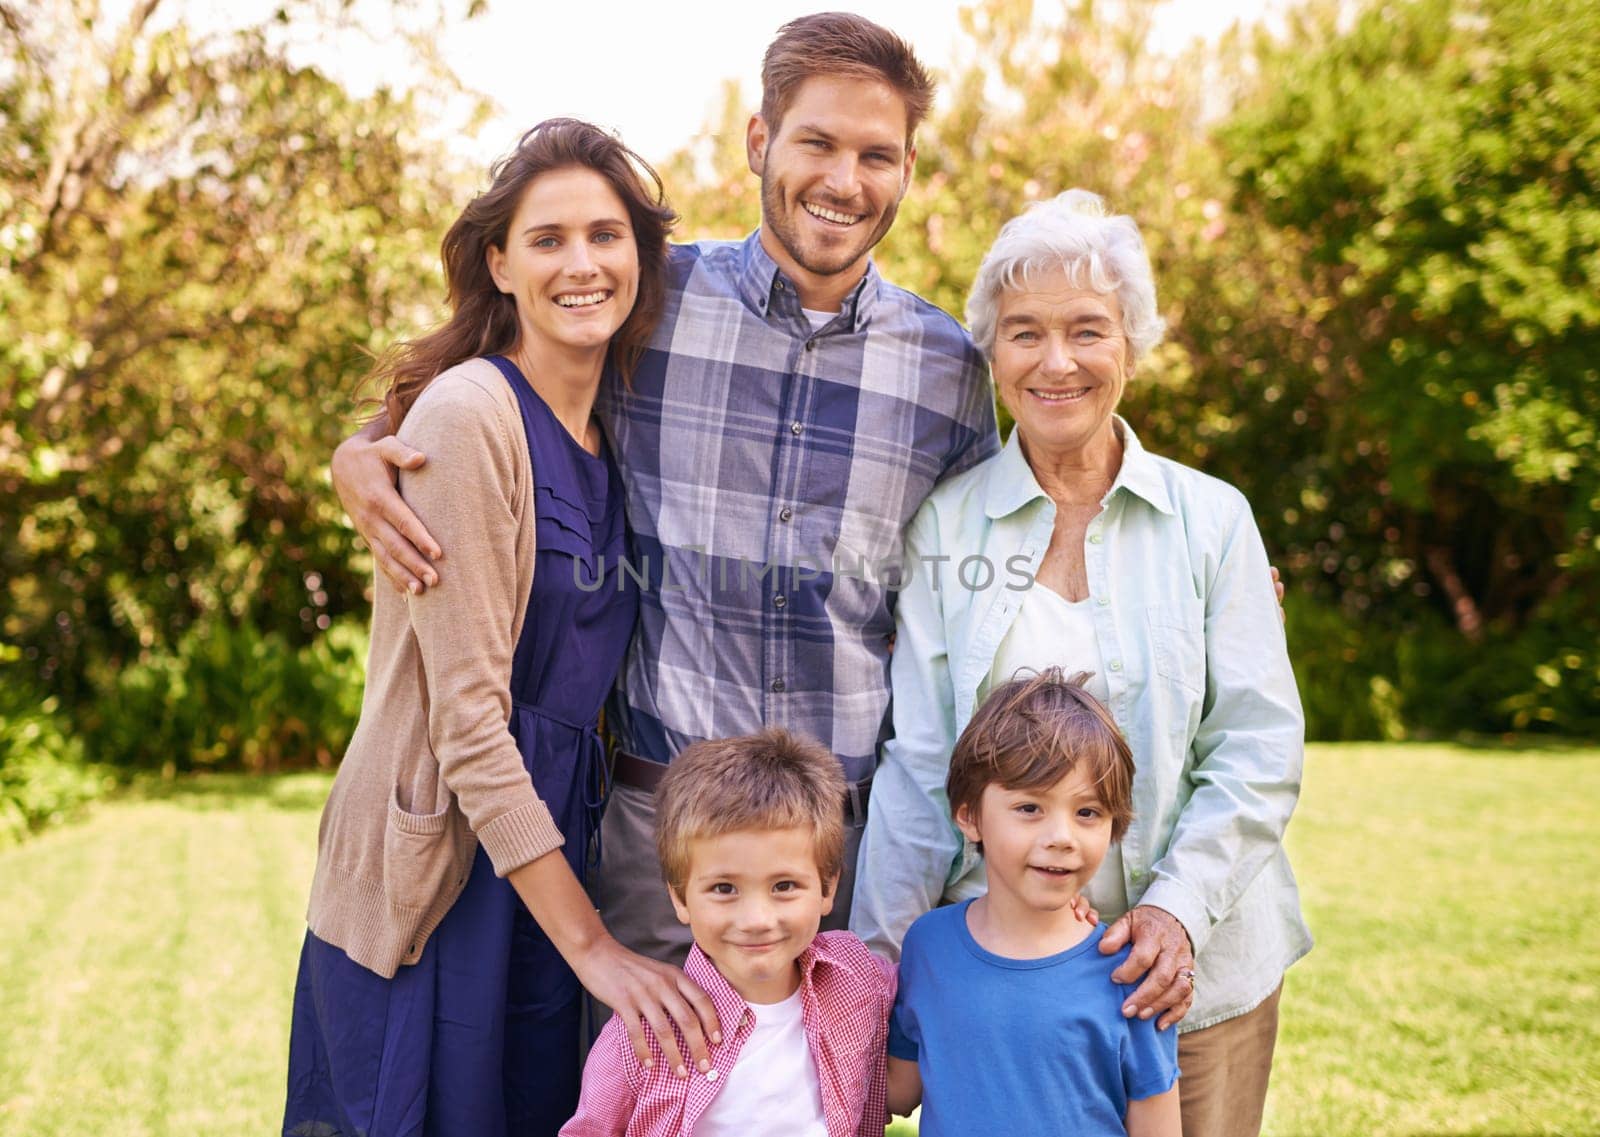 Family, outdoor and portrait for holiday, vacation and backyard with children and smile with love. Mom, dad and grandma with kids, nature and trees for memories, elderly and joy together in bonding.